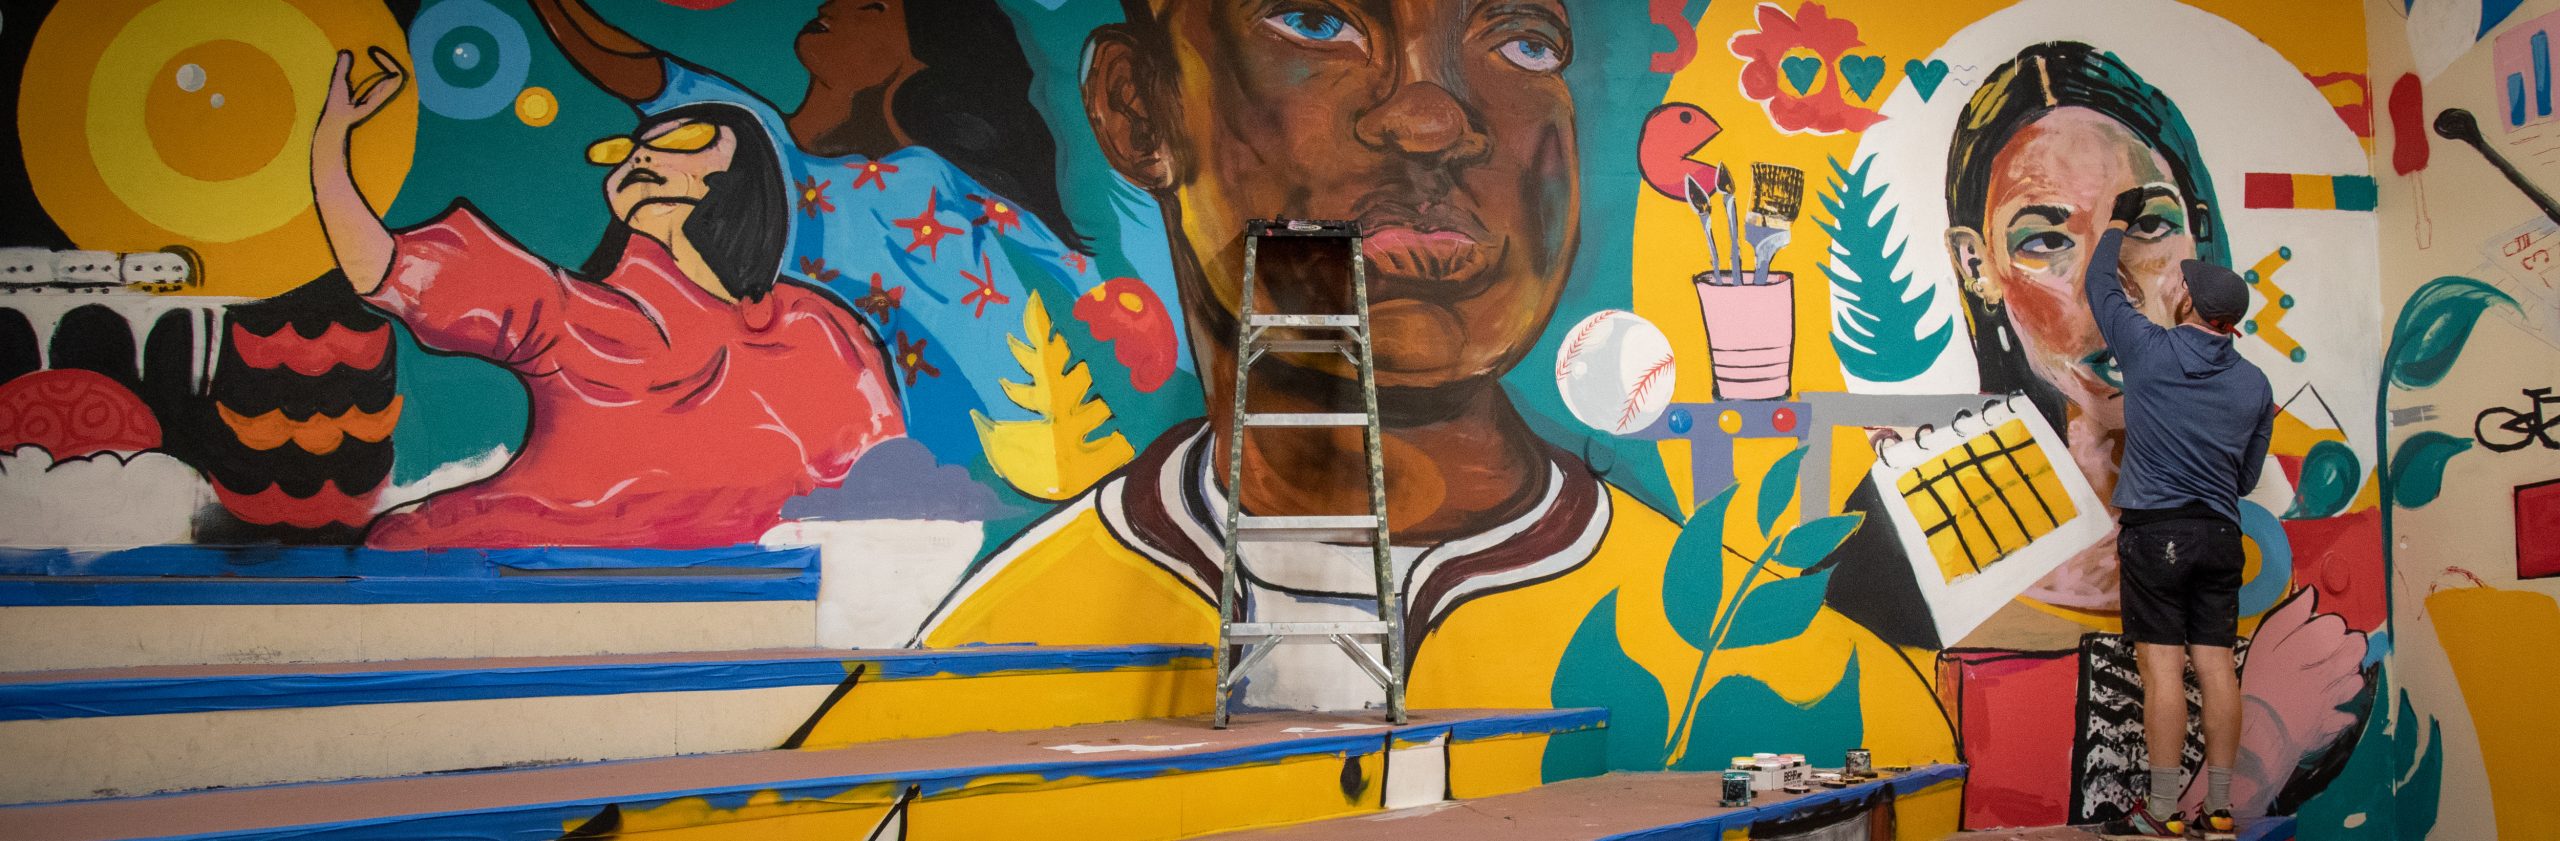 New Mural Welcomes Lincoln Students to Postsecondary Lab